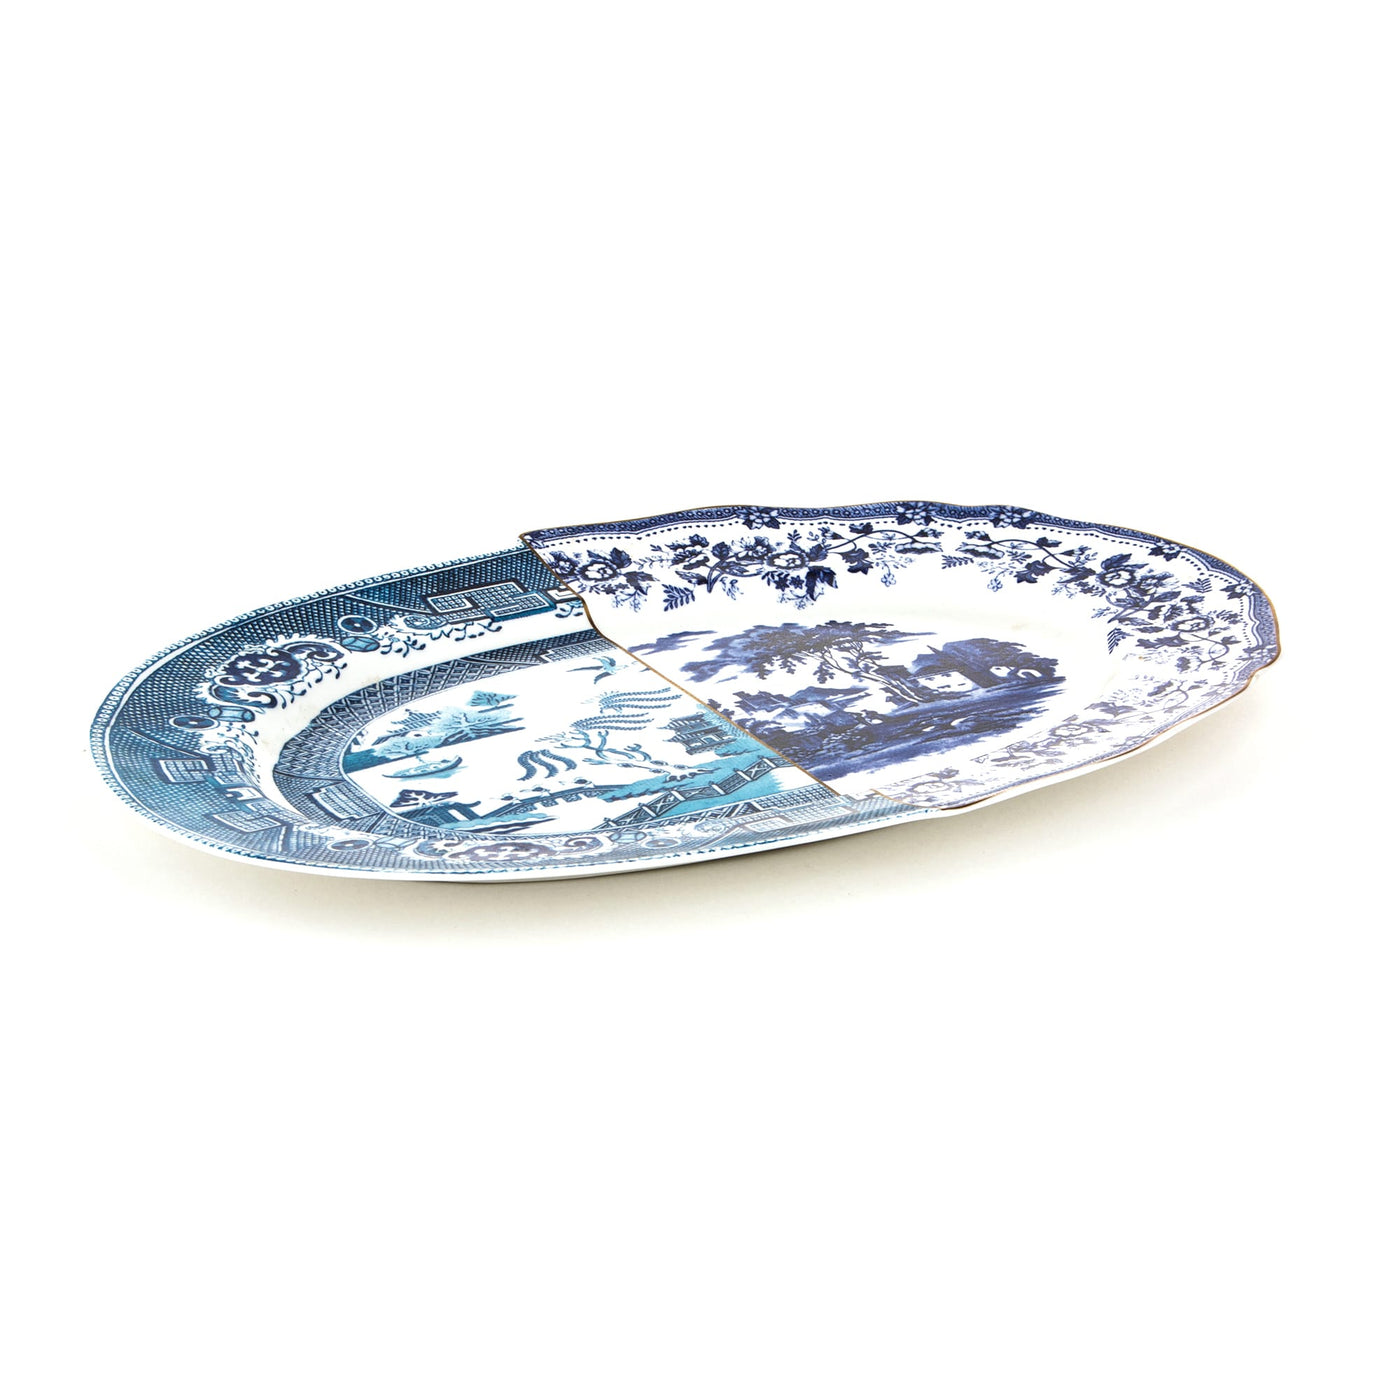 Hybrid Diomira China Porcelain Tray by Seletti